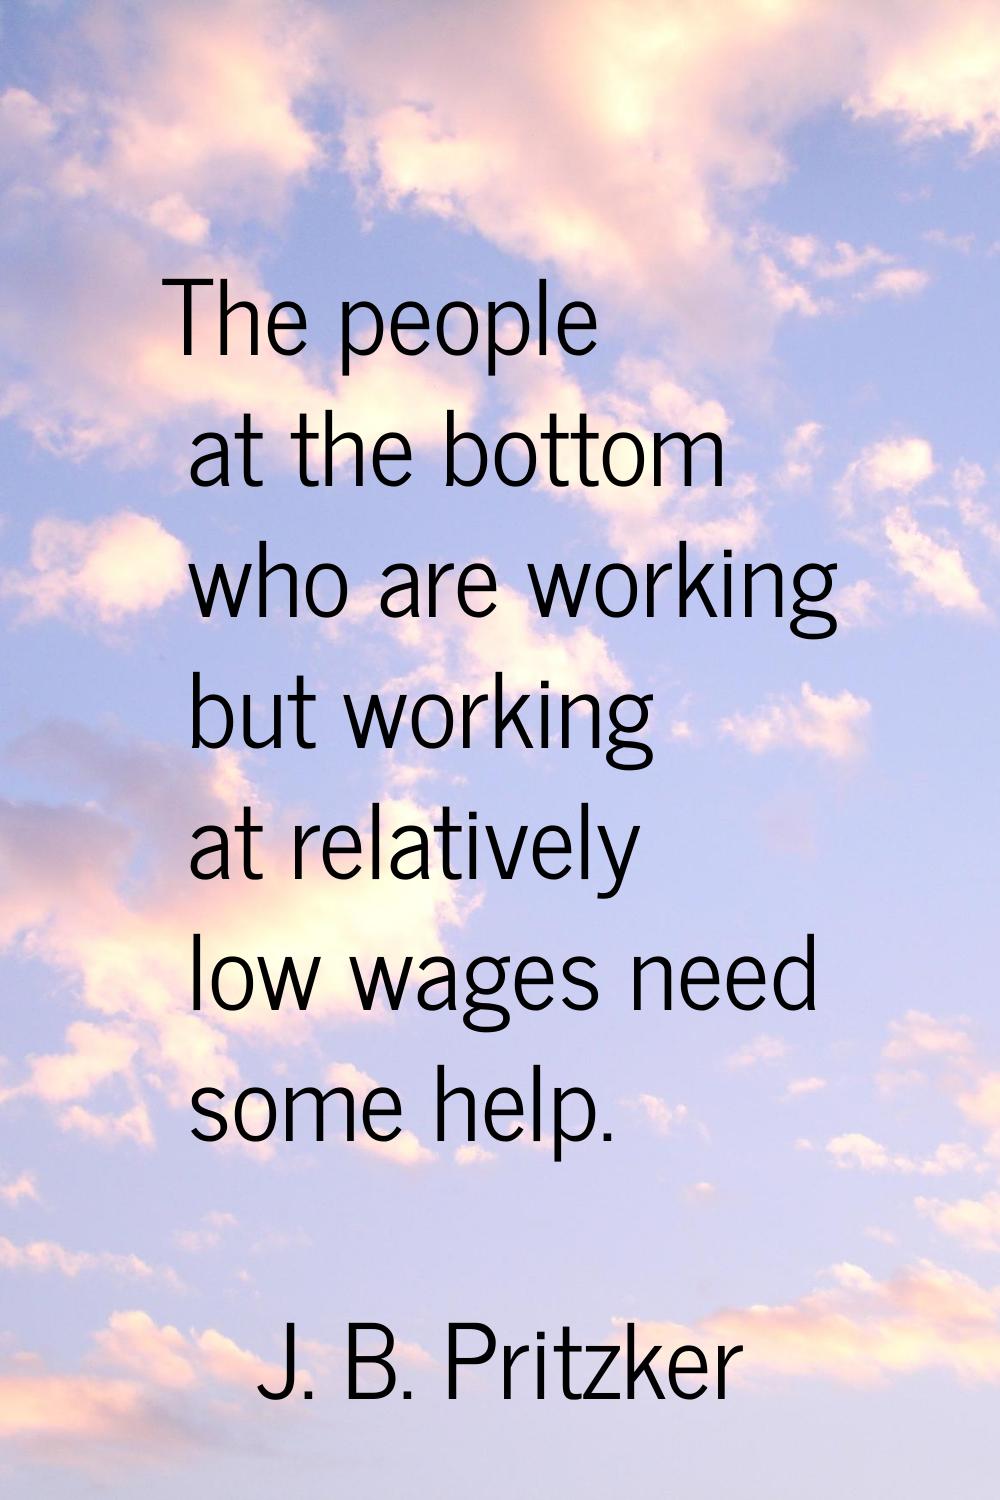 The people at the bottom who are working but working at relatively low wages need some help.